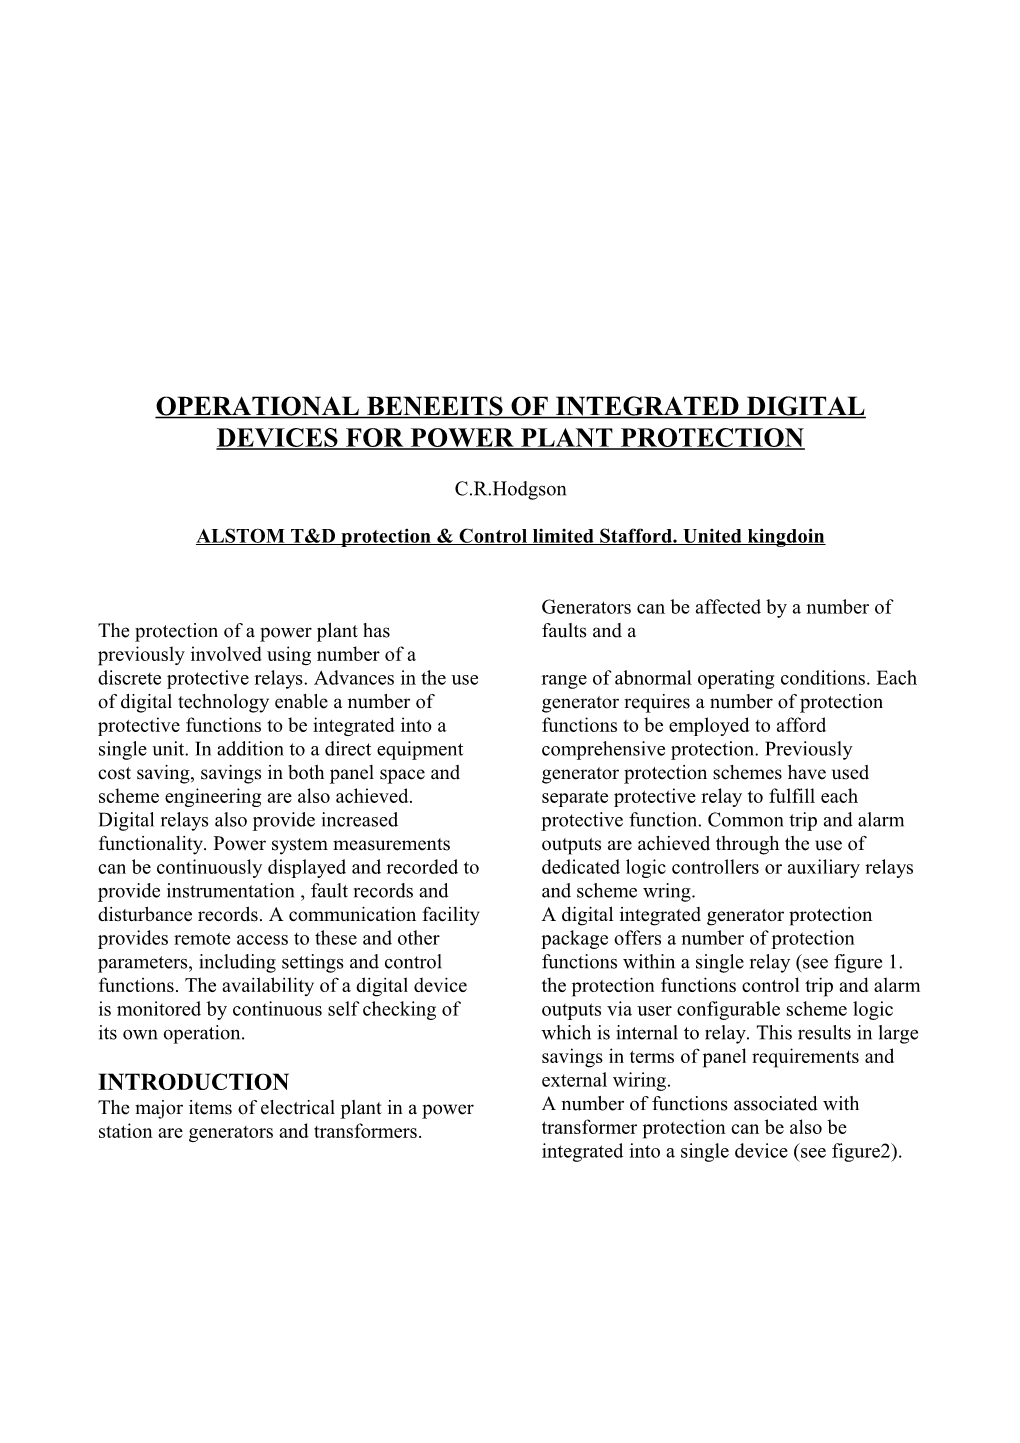 Operational Beneeits of Integrated Digital Devices for Power Plant Protection